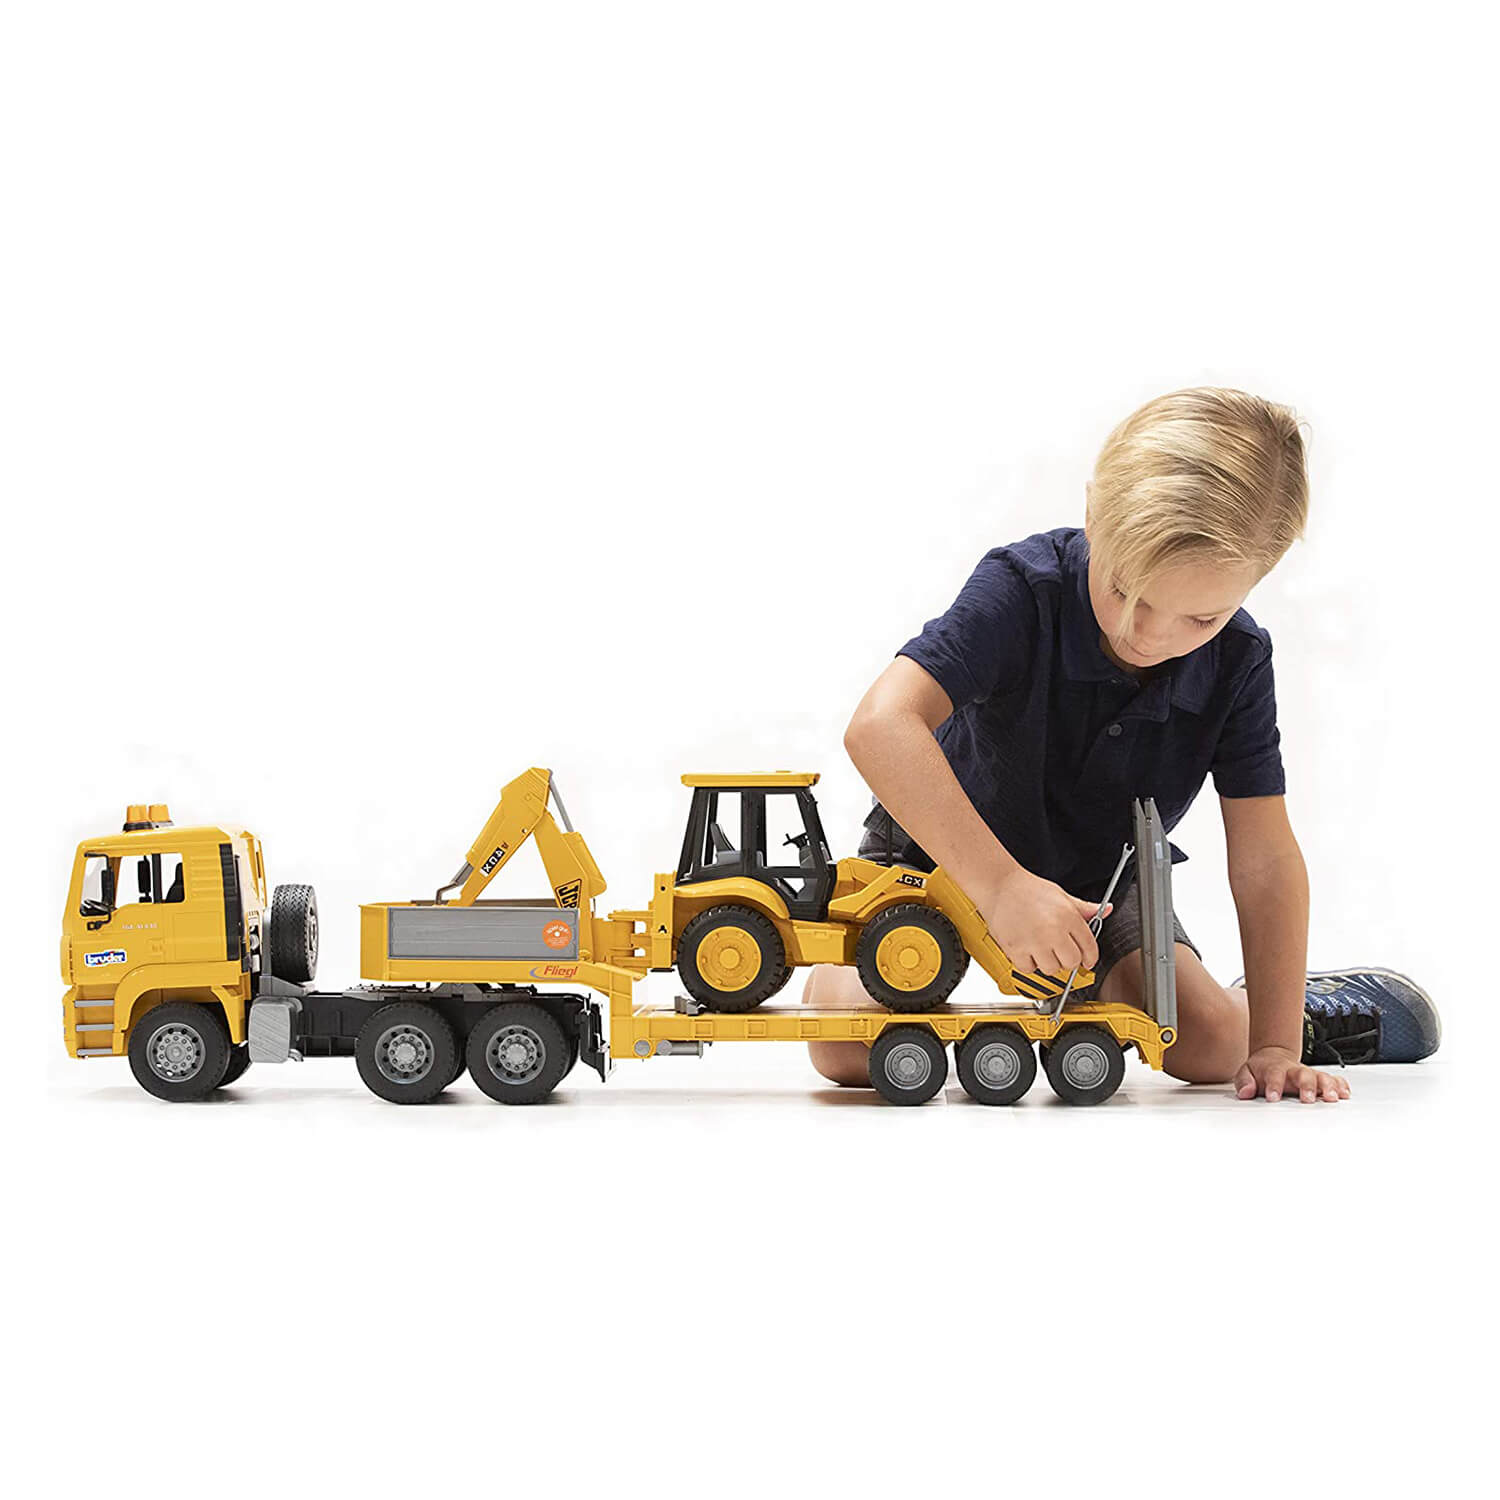 Kid playing with the low loader truck.